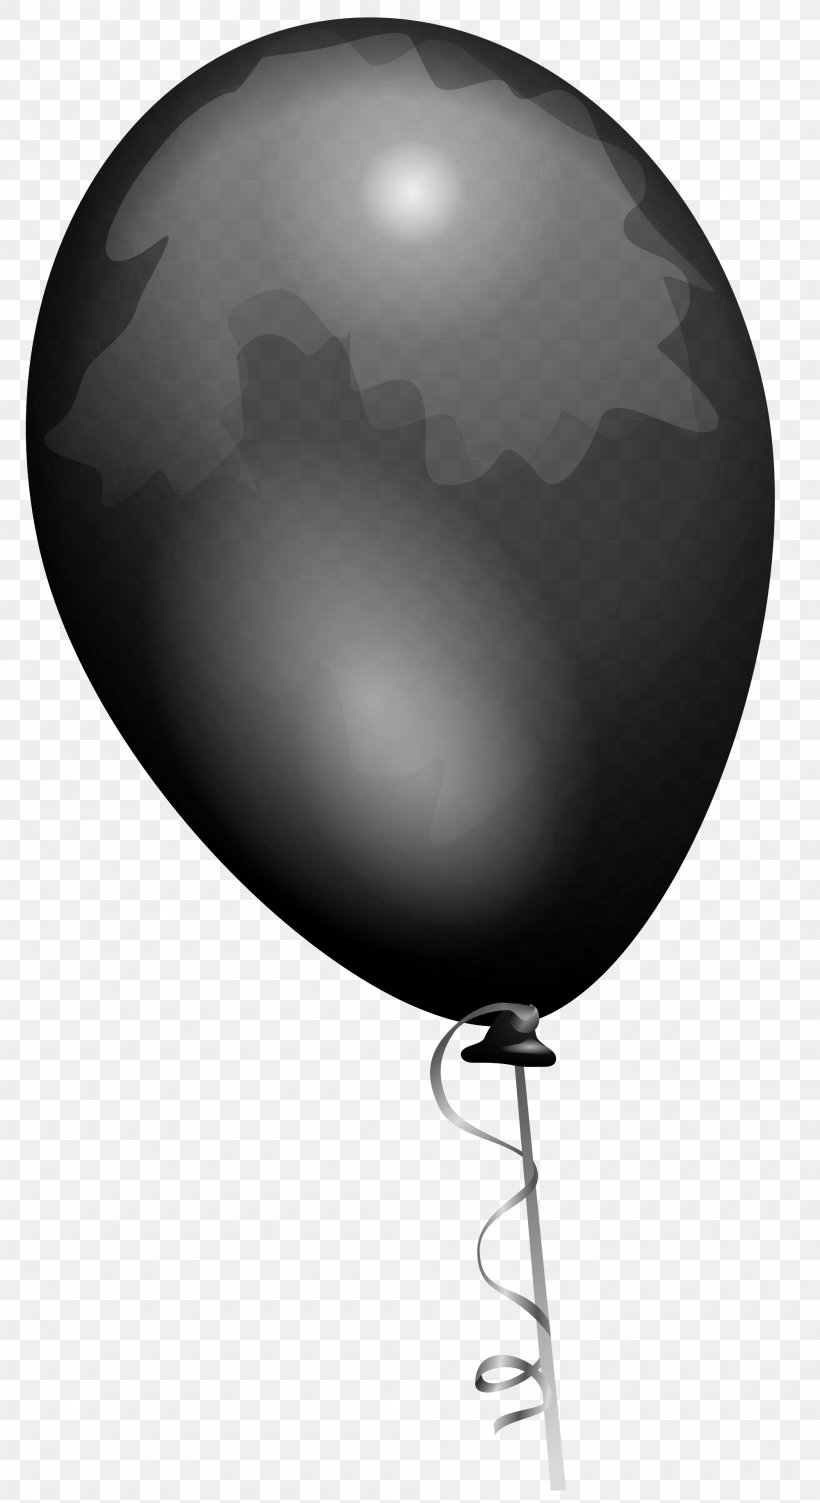 Toy Balloon Clip Art, PNG, 2000x3667px, Balloon, Black And White, Hot Air Balloon, Public Domain, Sphere Download Free